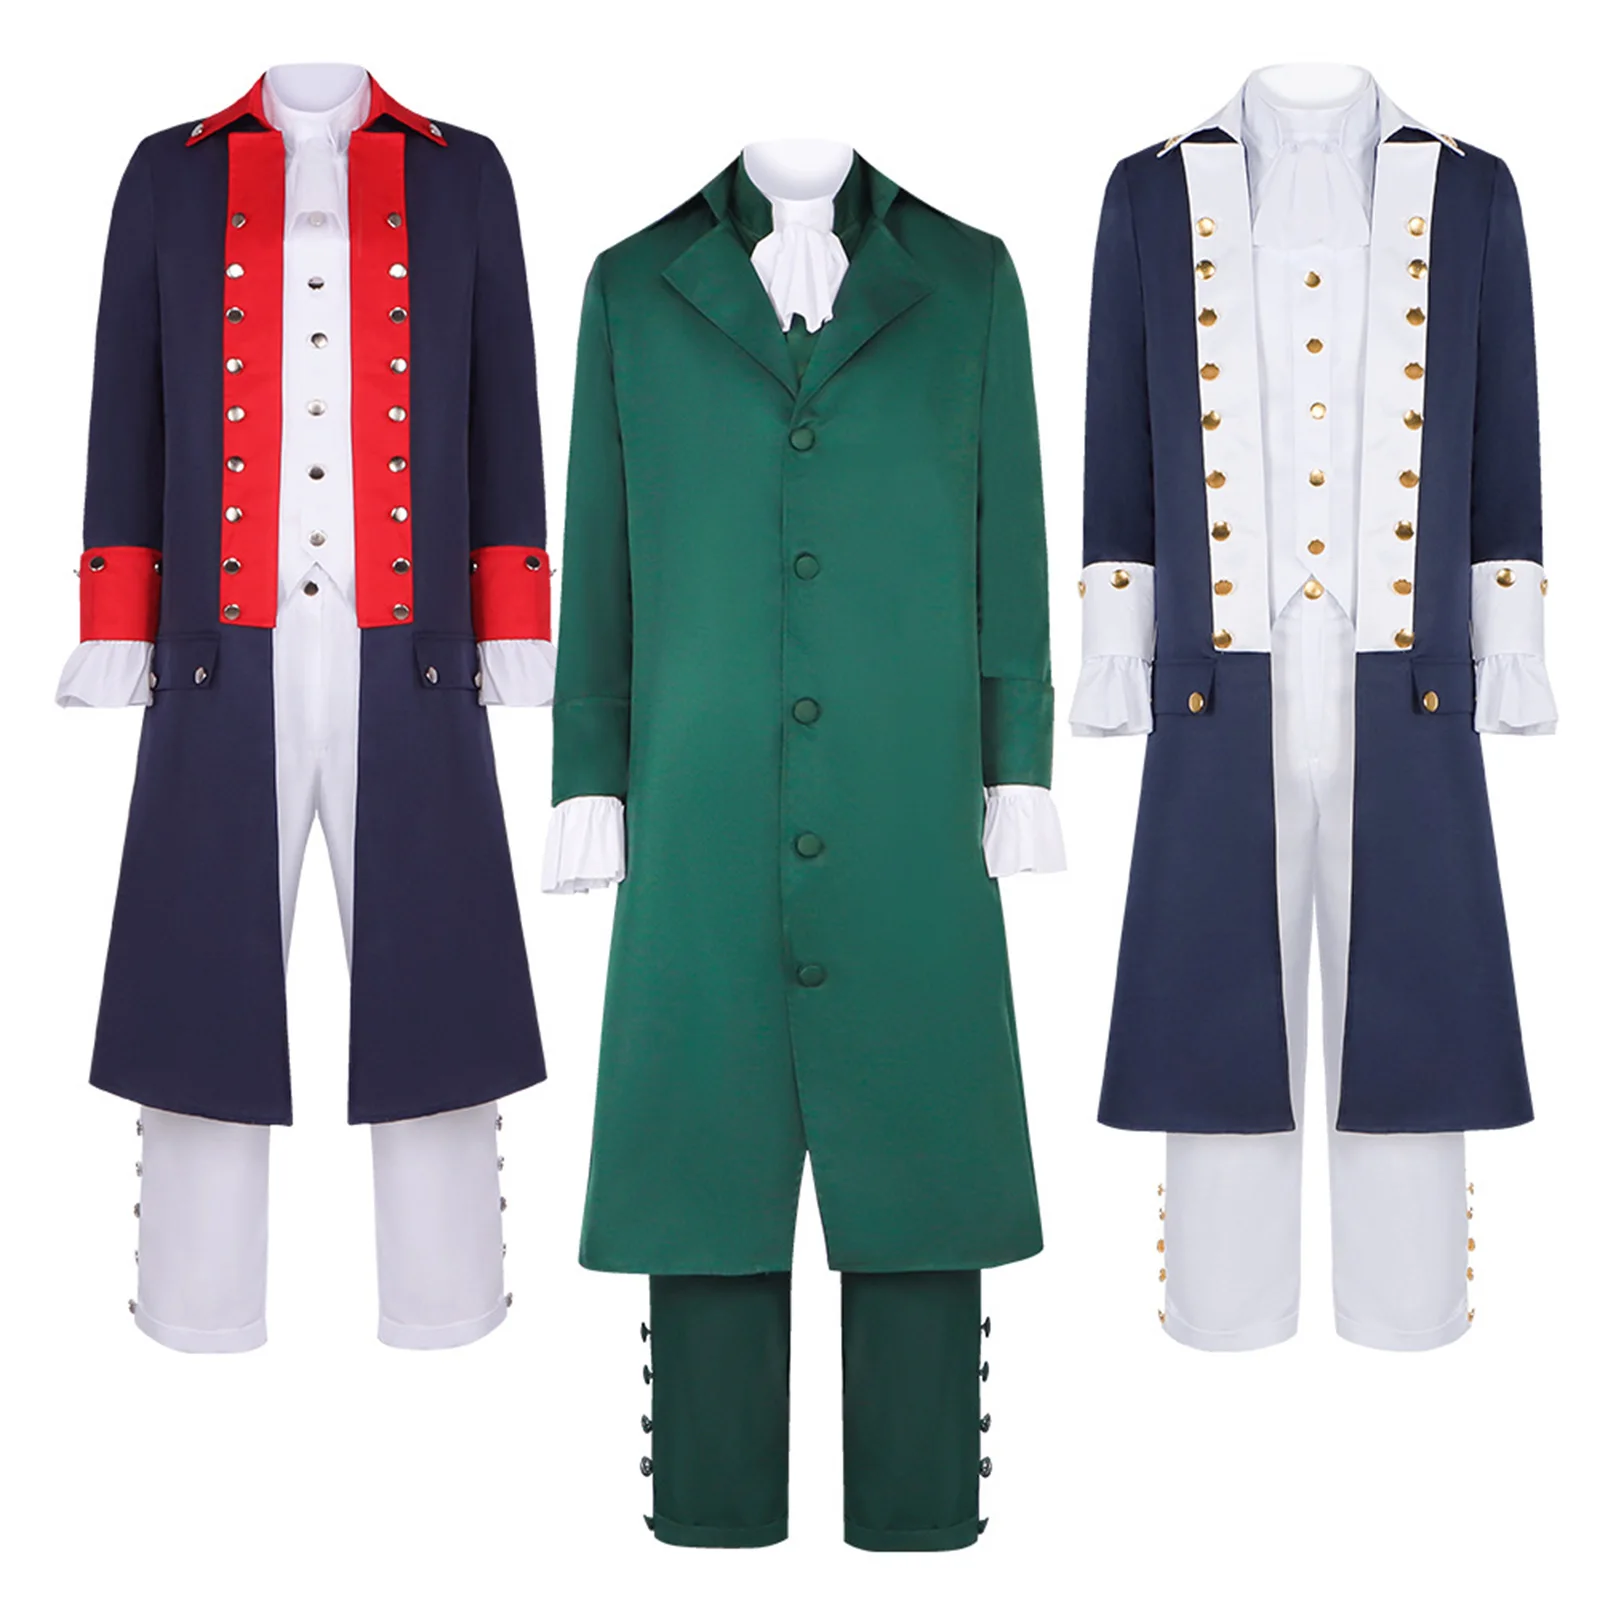 

Musical Rock Opera Hamilton Alexander Cosplay Victorian Costume Adult Men Boys Parent Child Outfits Medieval Navy Blue Trench